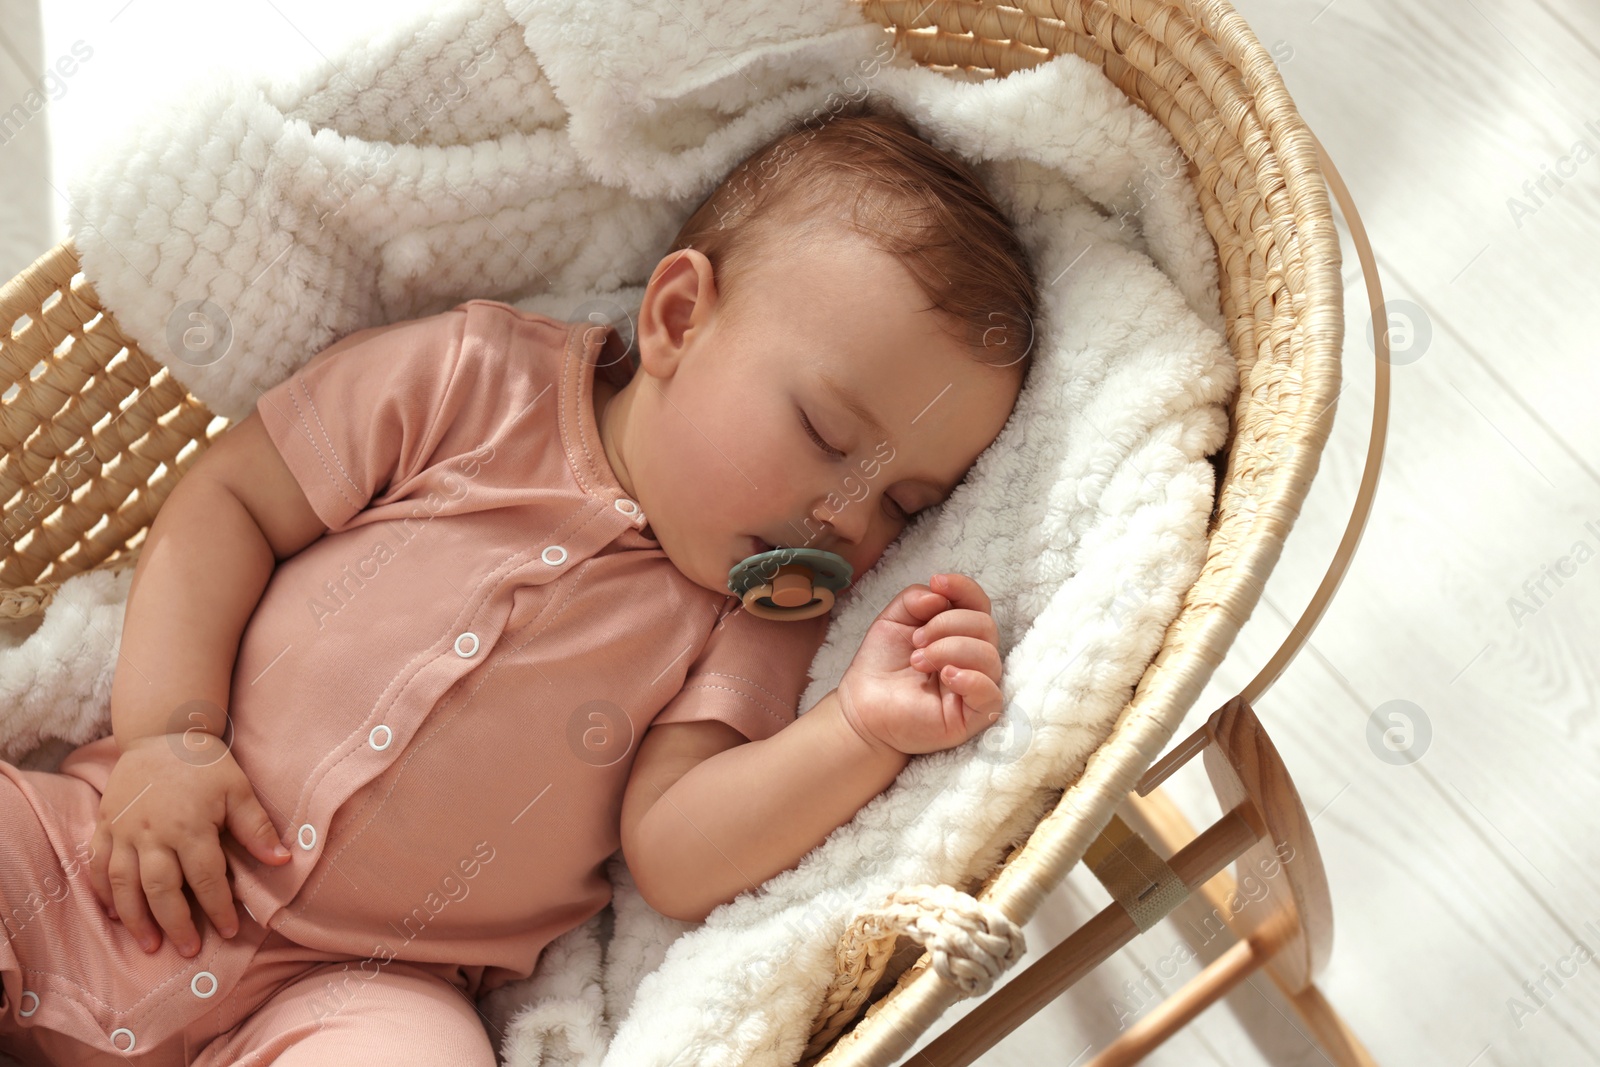 Photo of Cute little baby with pacifier sleeping in wicker crib at home, above view